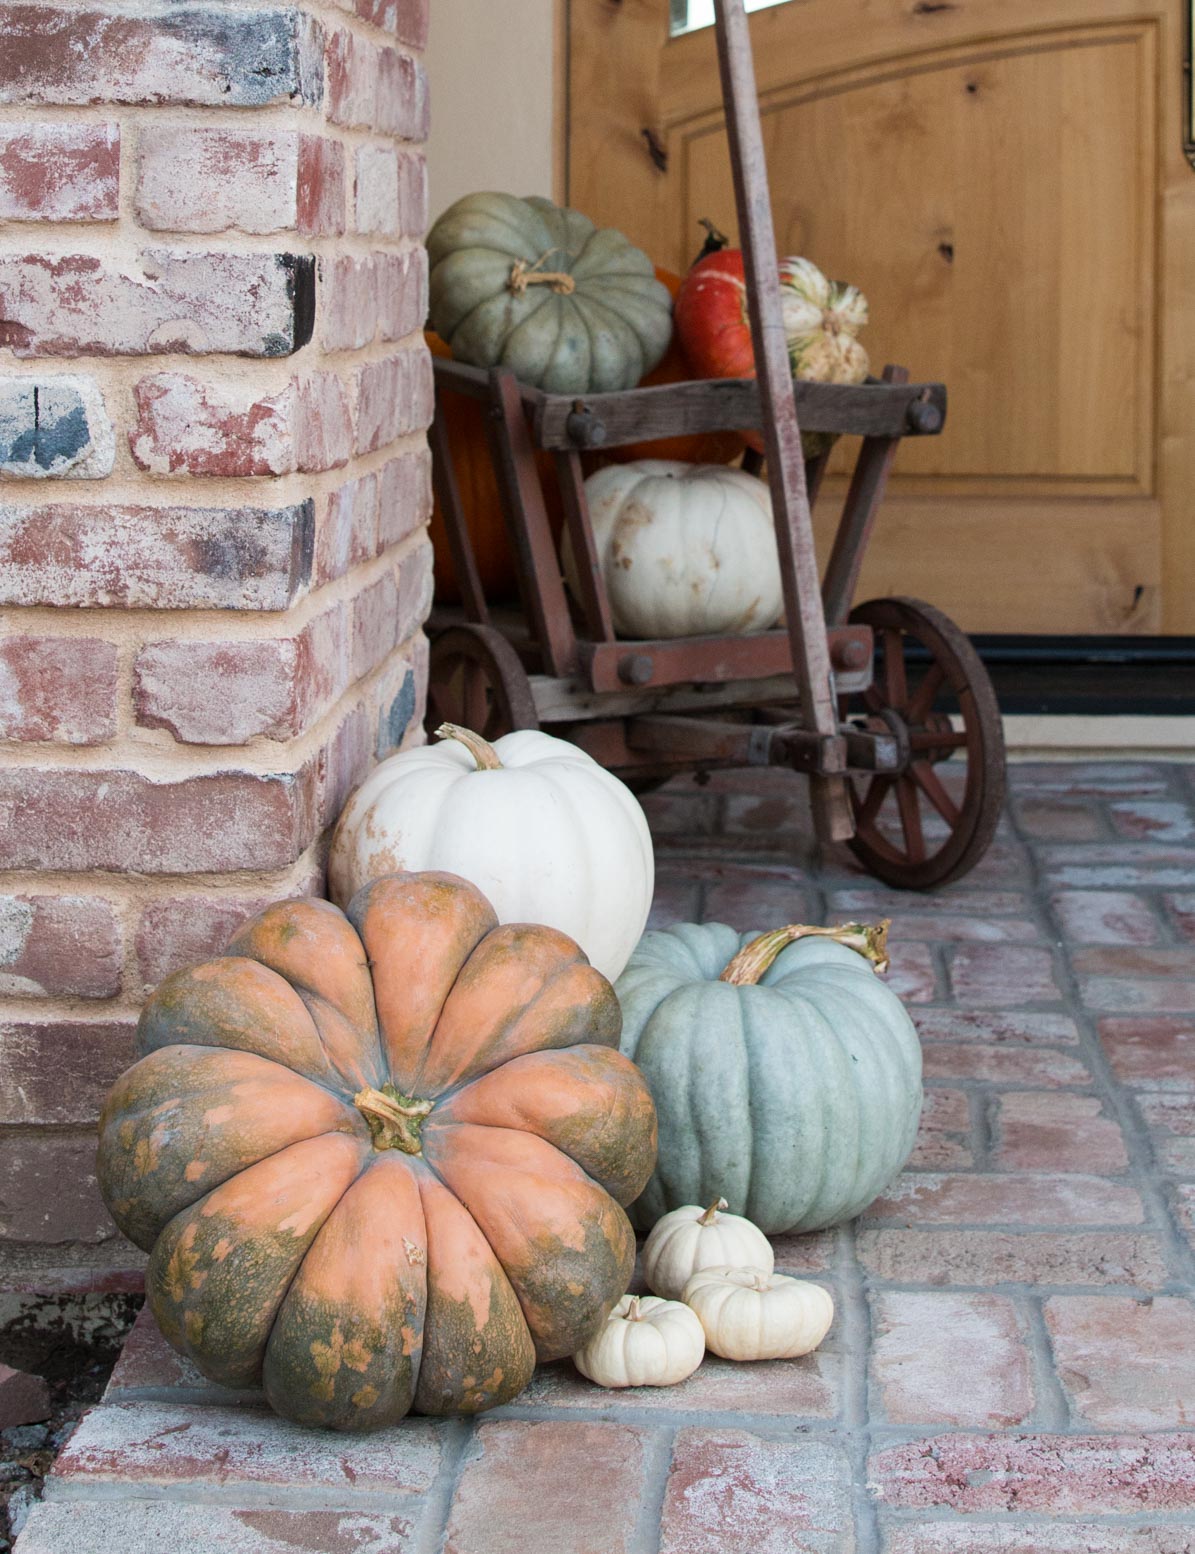 Fall porch decorating ideas with fairytale pumpkins and a goat cart